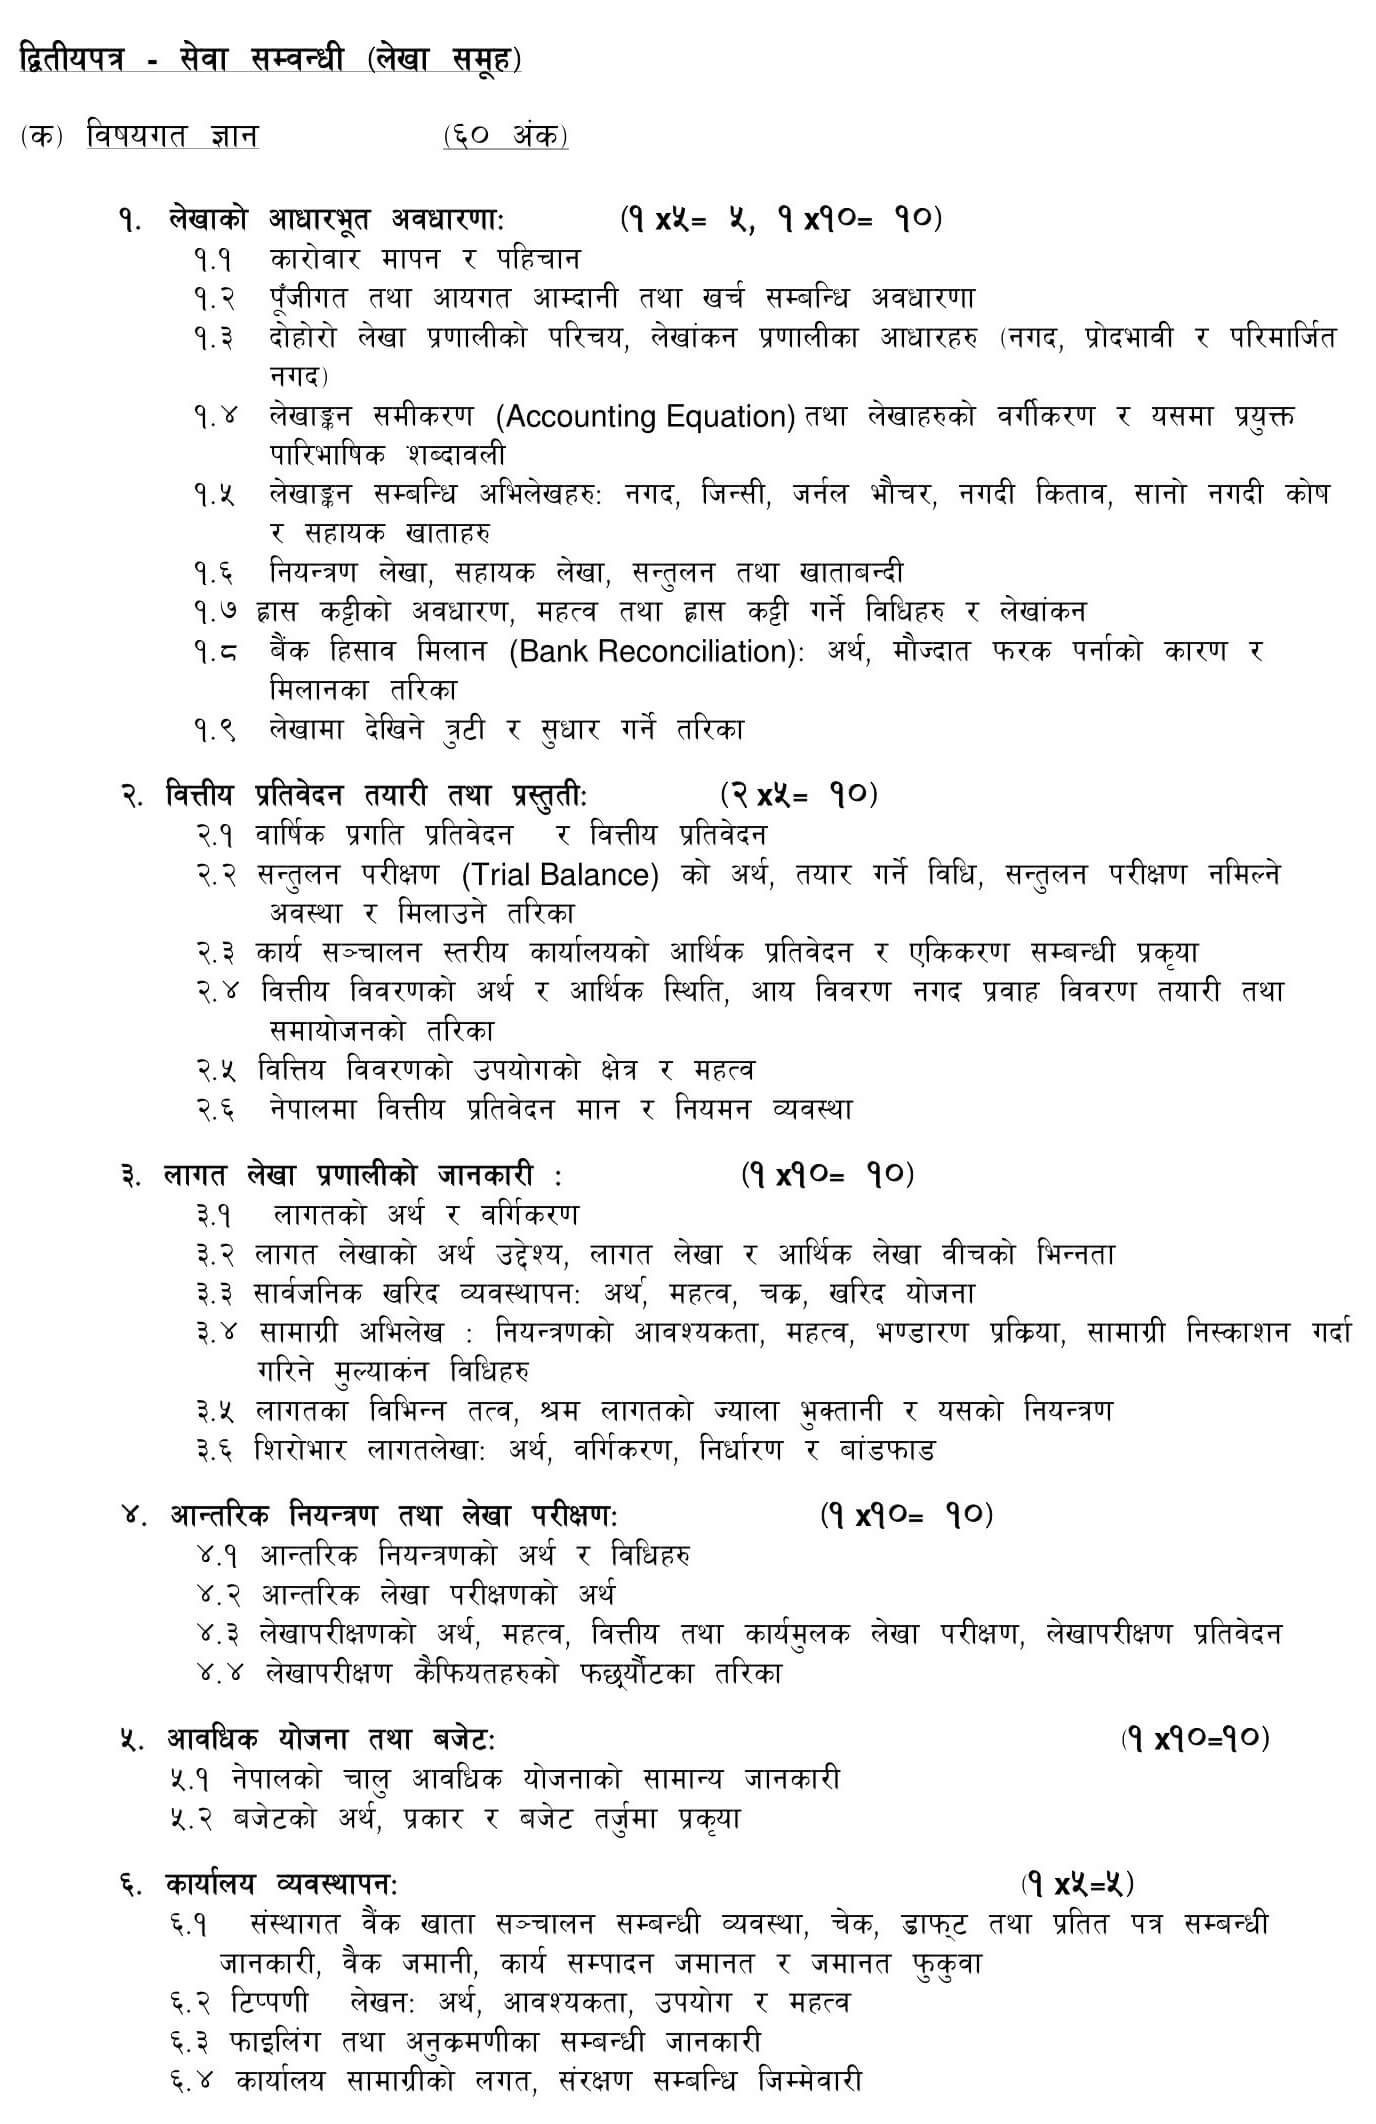 Nepal Electricity Authority - NEA Syllabus Department: Administrations Rank: Level 5 Account / Storekeeper Date: 2074/09/03. NEA Syllabus Accountant and Store Keeper PDF Download